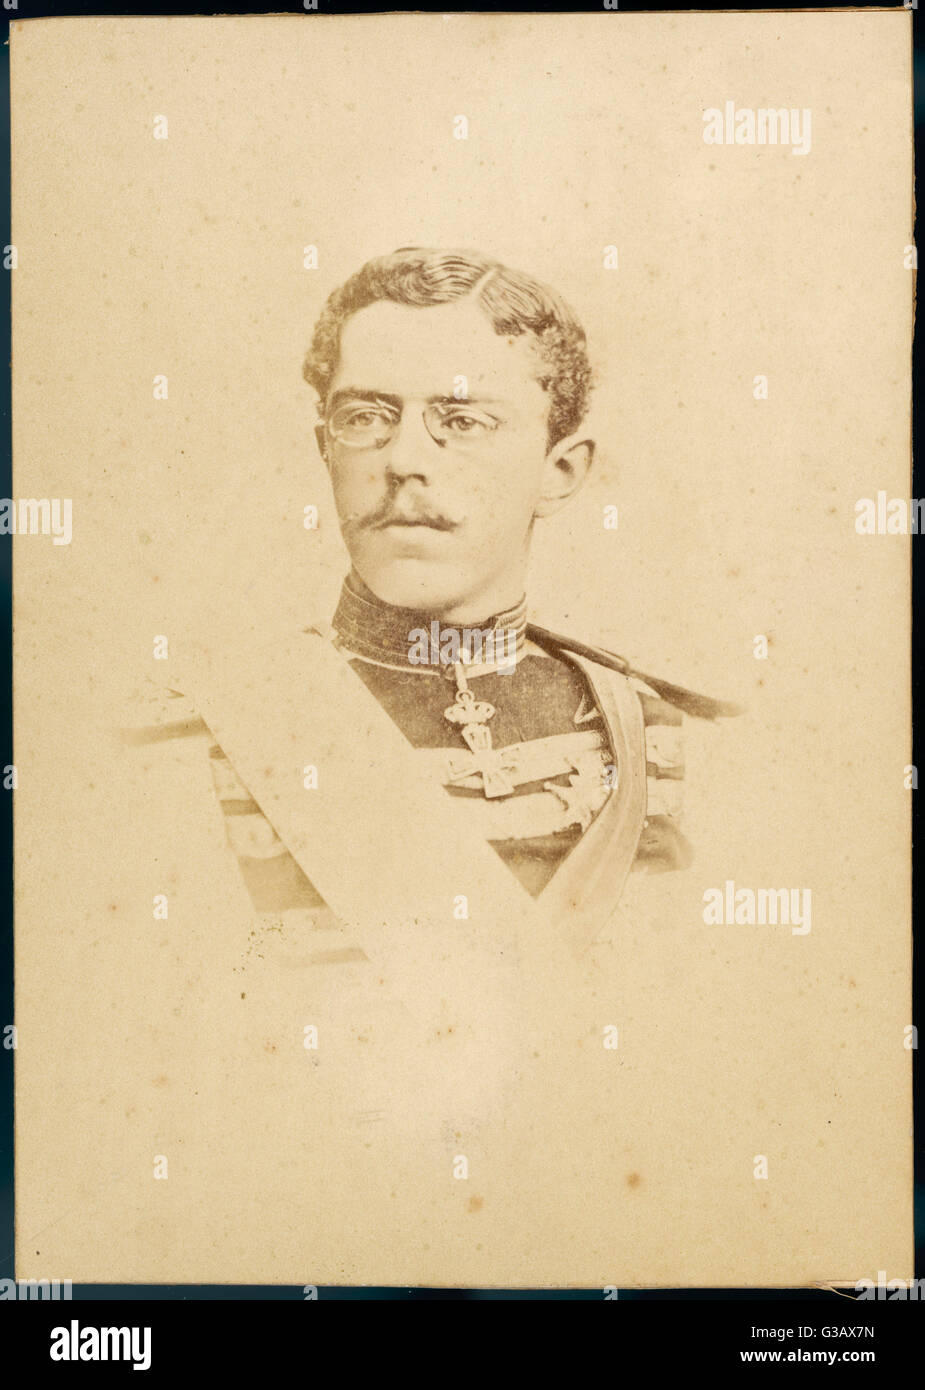 OSCAR II  King of Sweden (1872-1907) and of Norway (1872-1905)  - seen here as Prince Oscar       Date: 1829 - 1907 Stock Photo